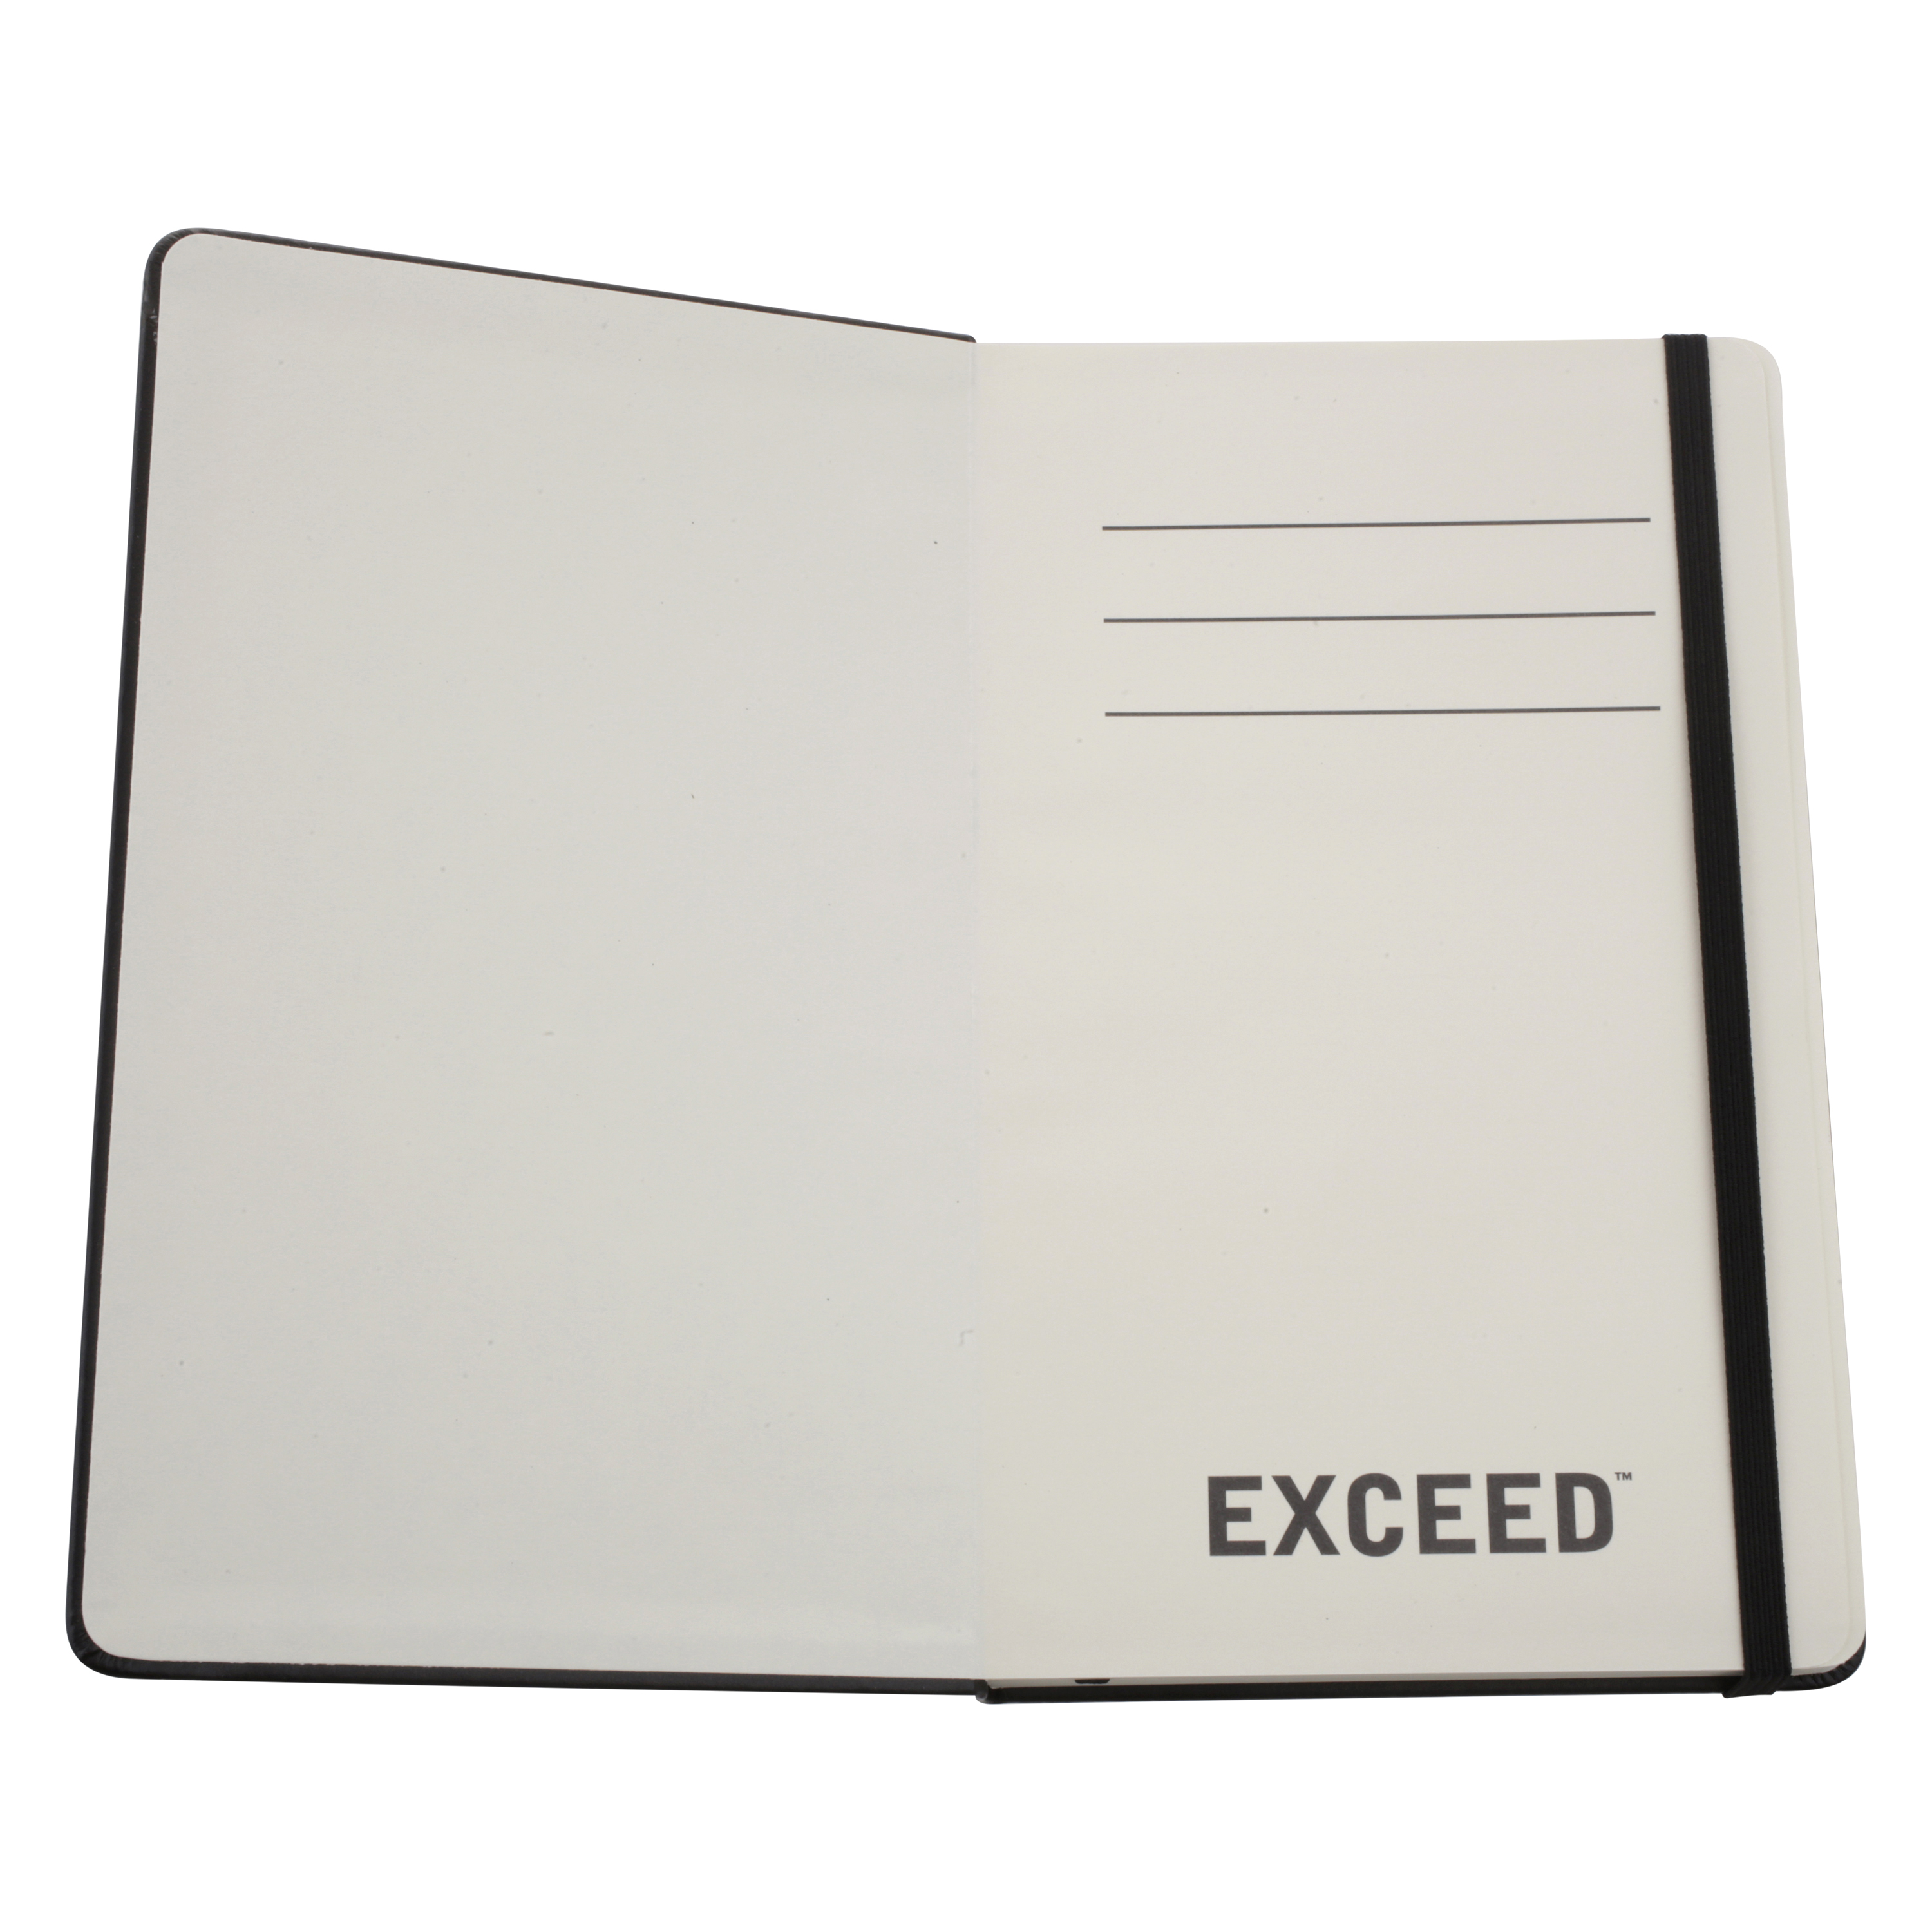 Exceed Medium Journal, Dot Grid, 120 Pages, 5" x 8.25", Black, 86520 - image 5 of 9